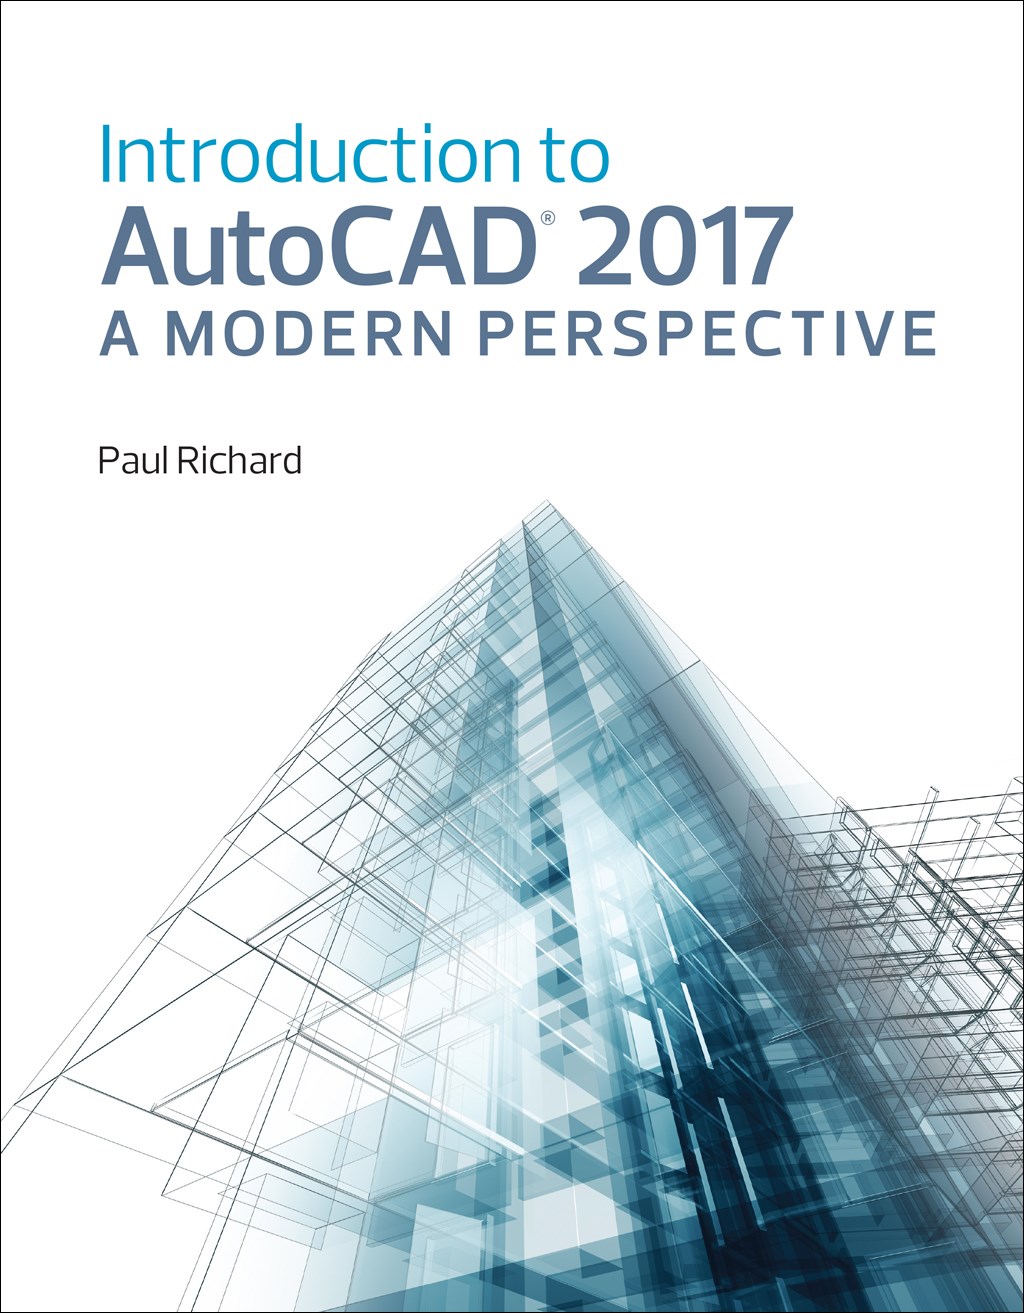 Introduction to AutoCAD 2017 (2-downloads)